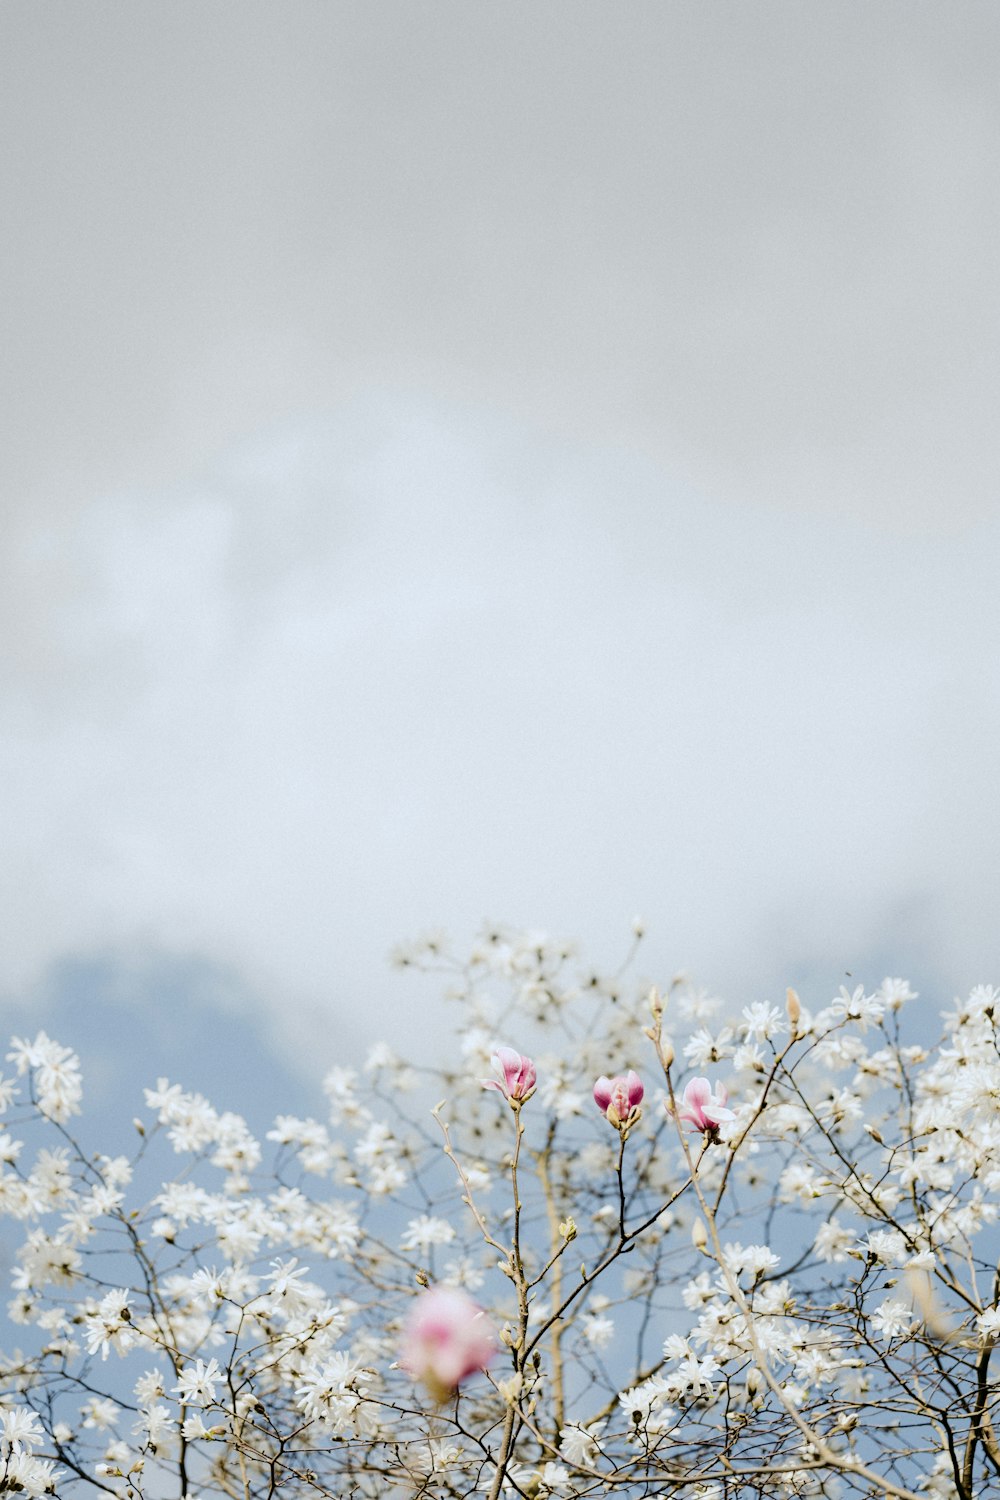 pink flower buds under white clouds and blue sky during daytime